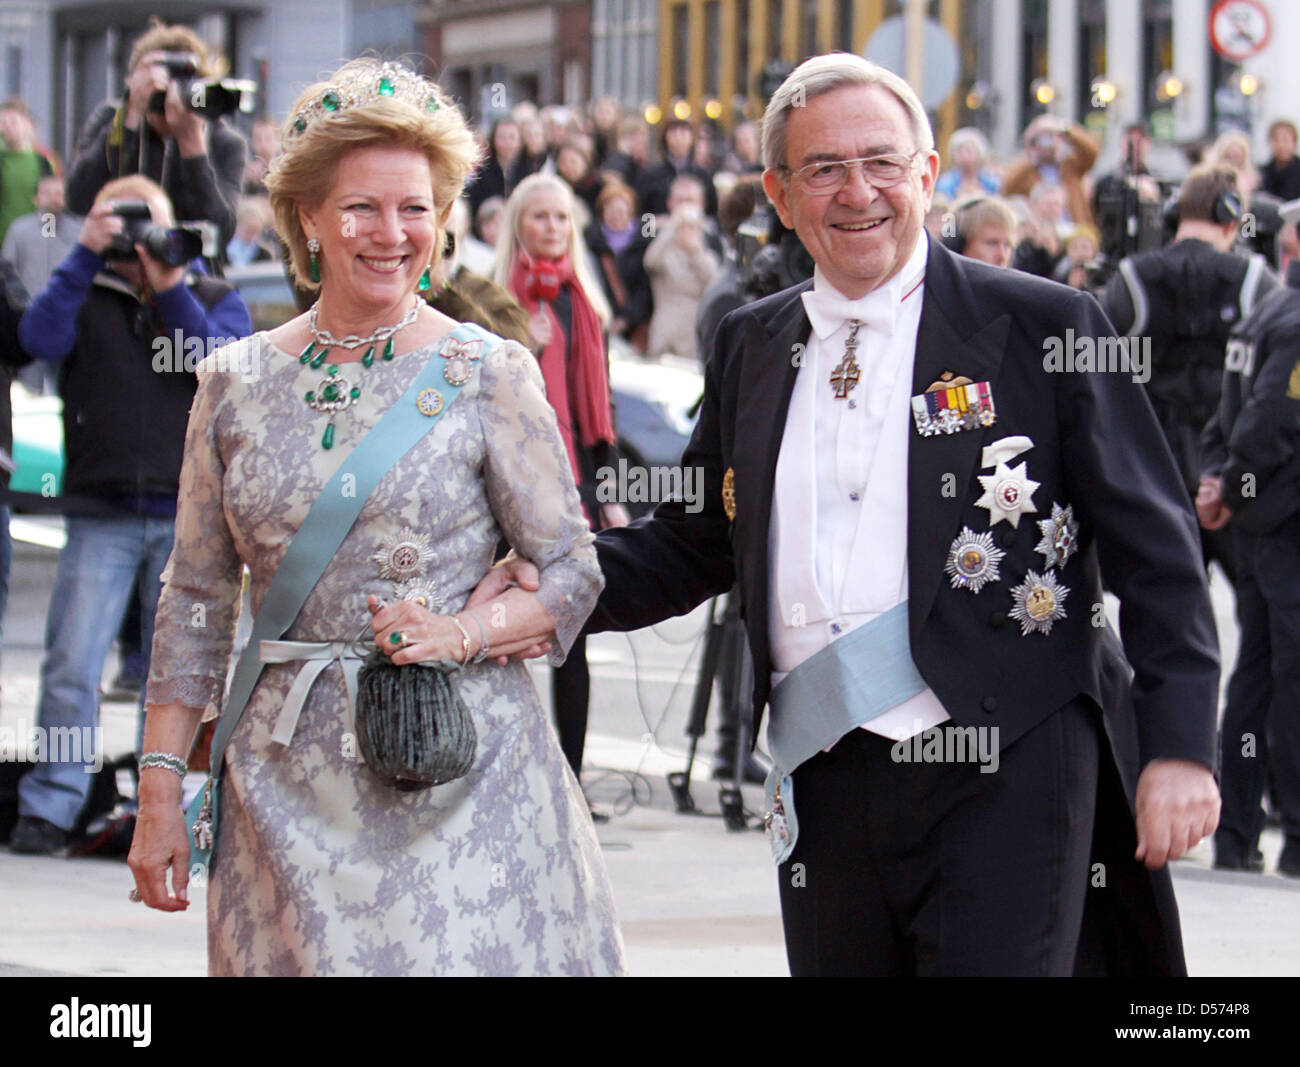 Queen Anne-Marie of Greece and King Constantine of Greece attend attend a special gala show at the Royal Theatre in Copenhagen, Denmark, 15 April 2010, in honor of Danish Queen Margrethe who will celebrate her 70th birthday on 16 April. Photo: Albert Nieboer (NETHERLANDS OUT) Stock Photo